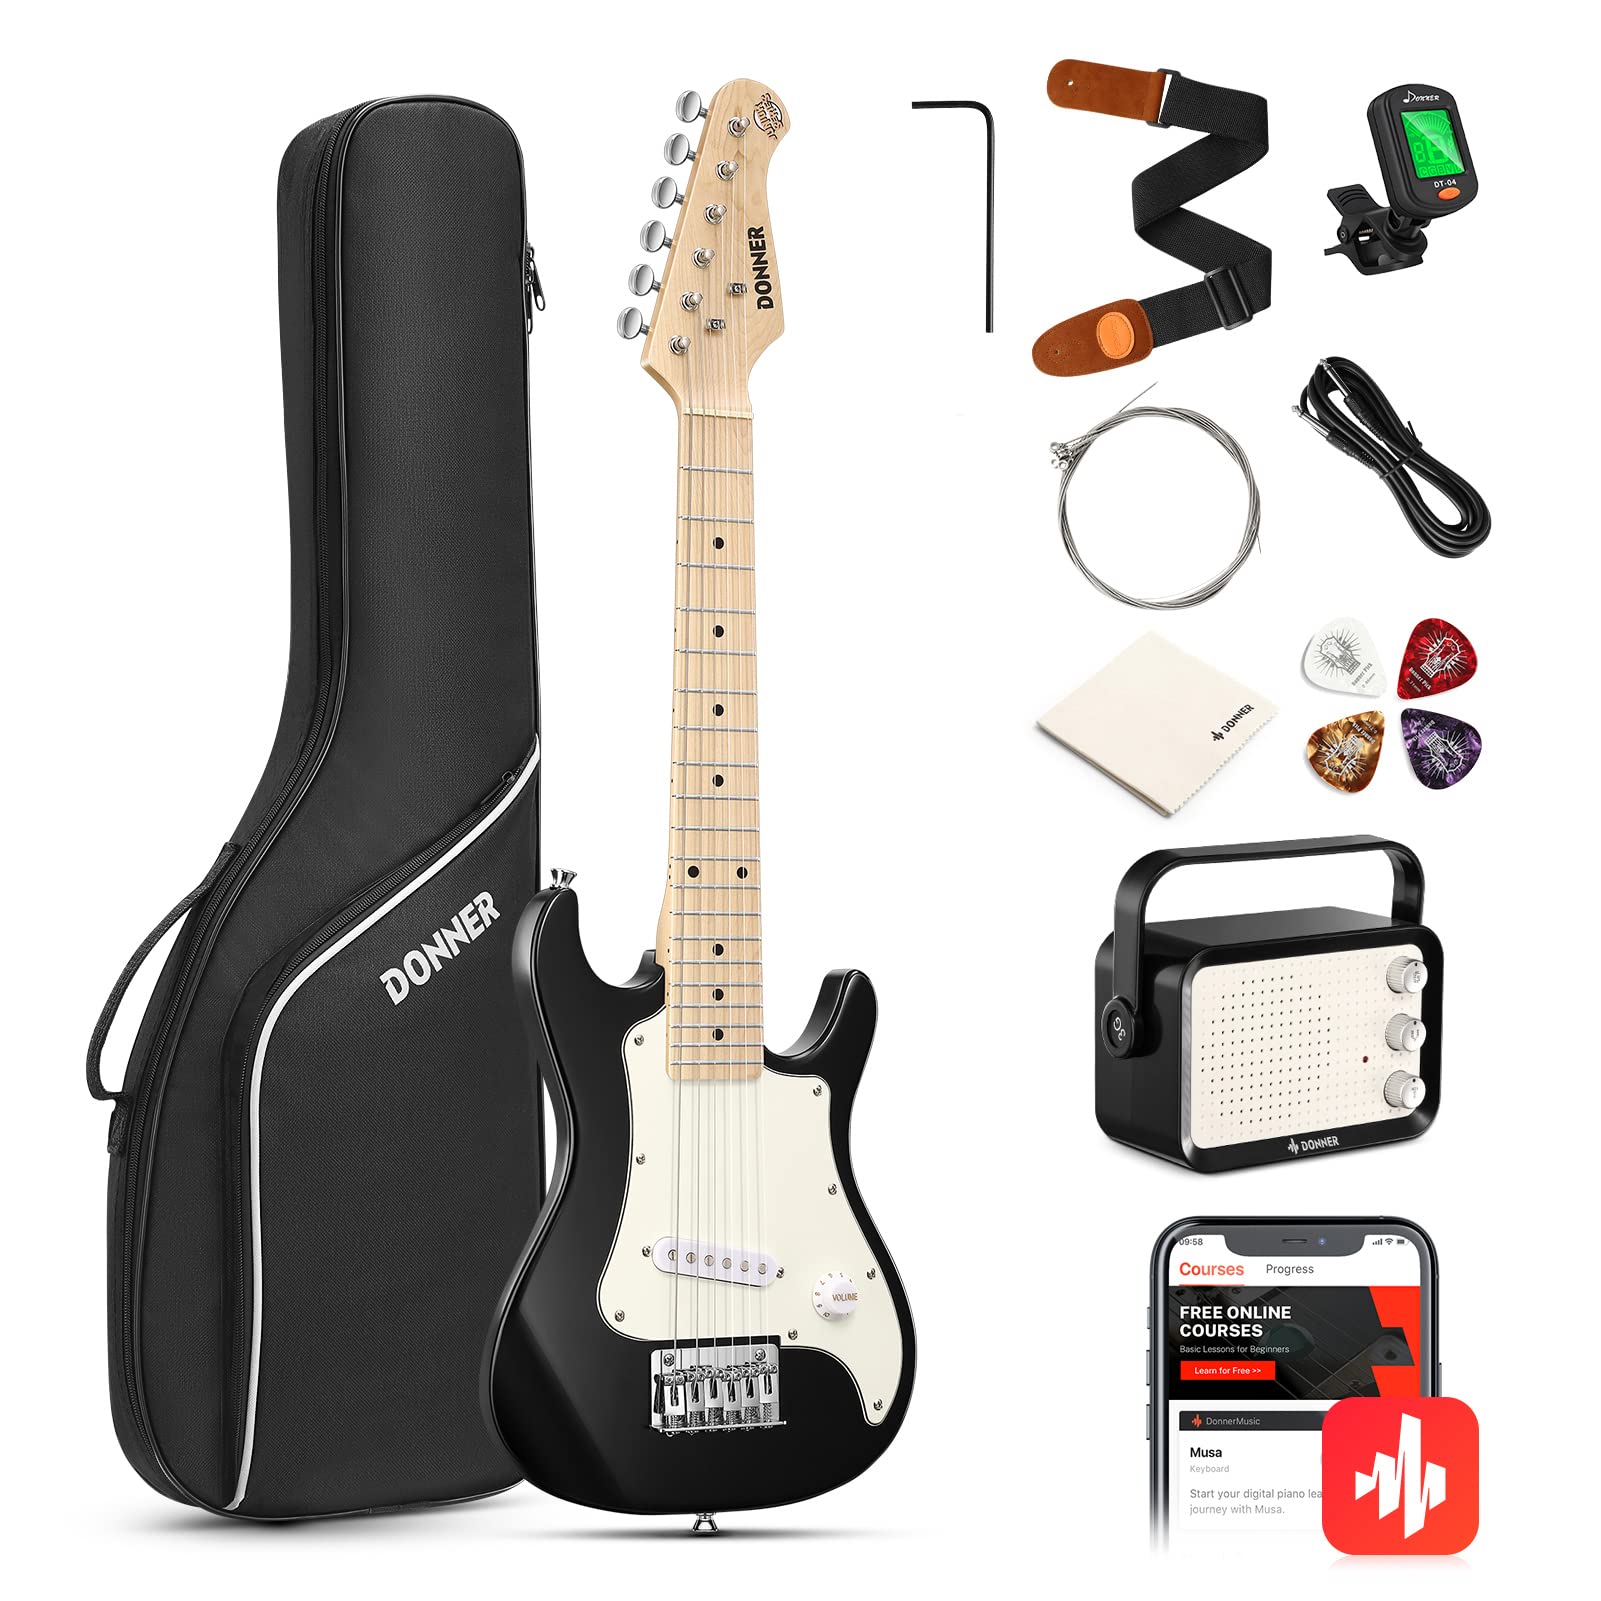 Donner 30 Inch Kids Electric guitar Beginner Kits ST Style Mini Electric guitar for Boys girls with Amp, 600D Bag, Tuner, Picks,